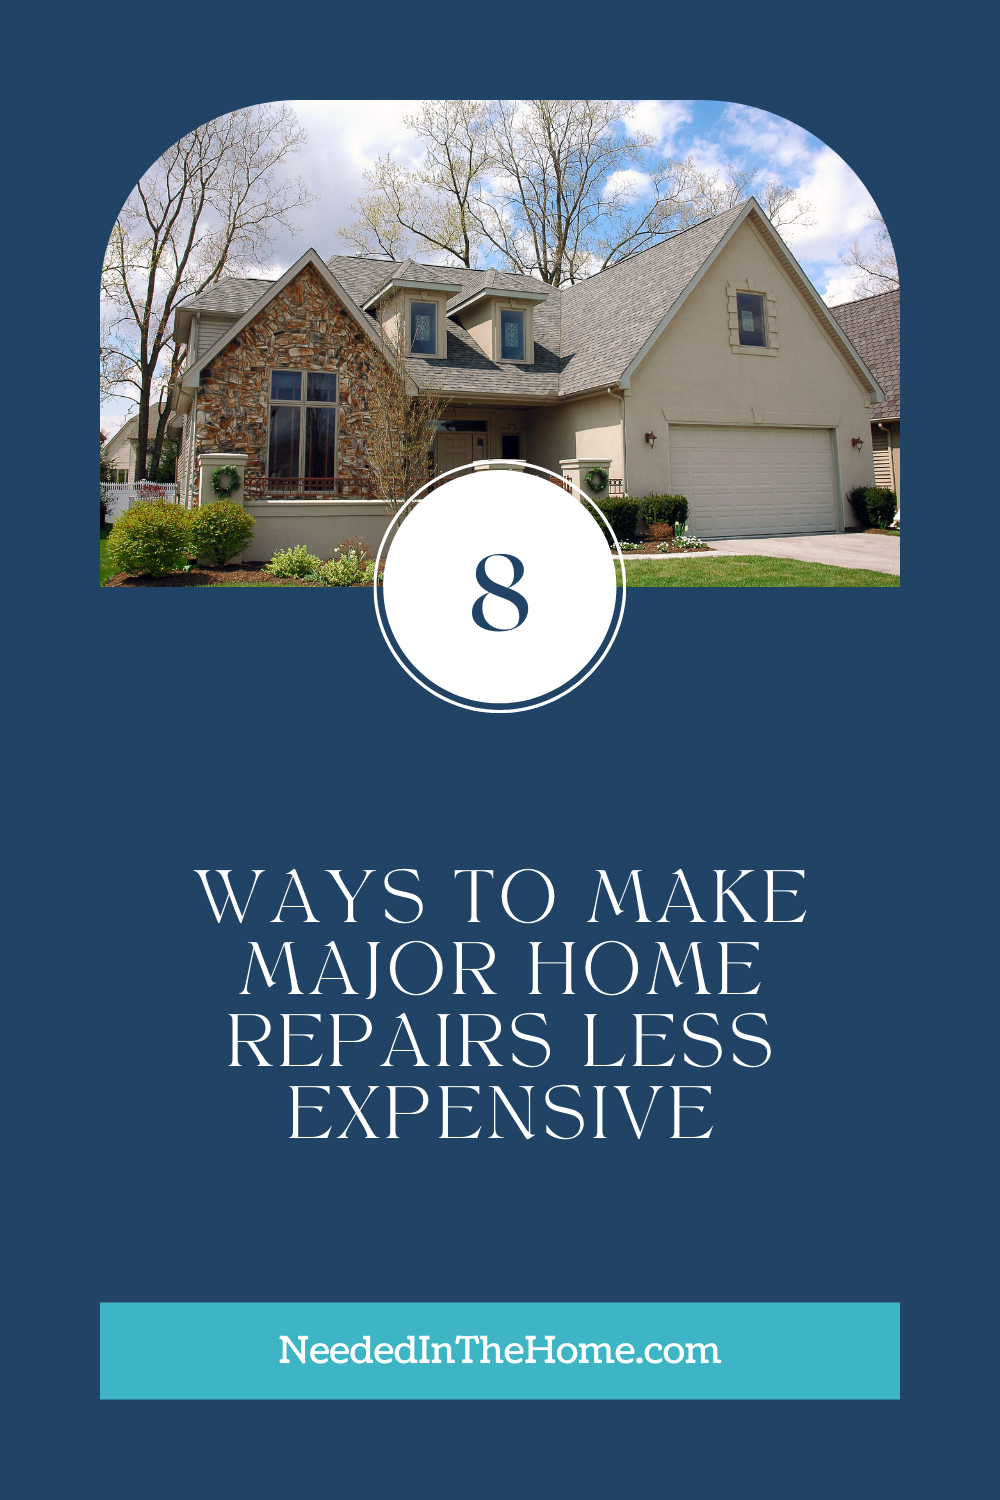 pinterest-pin-description 8 ways to make major home repairs less expensive outside front view of two story home neededinthehome